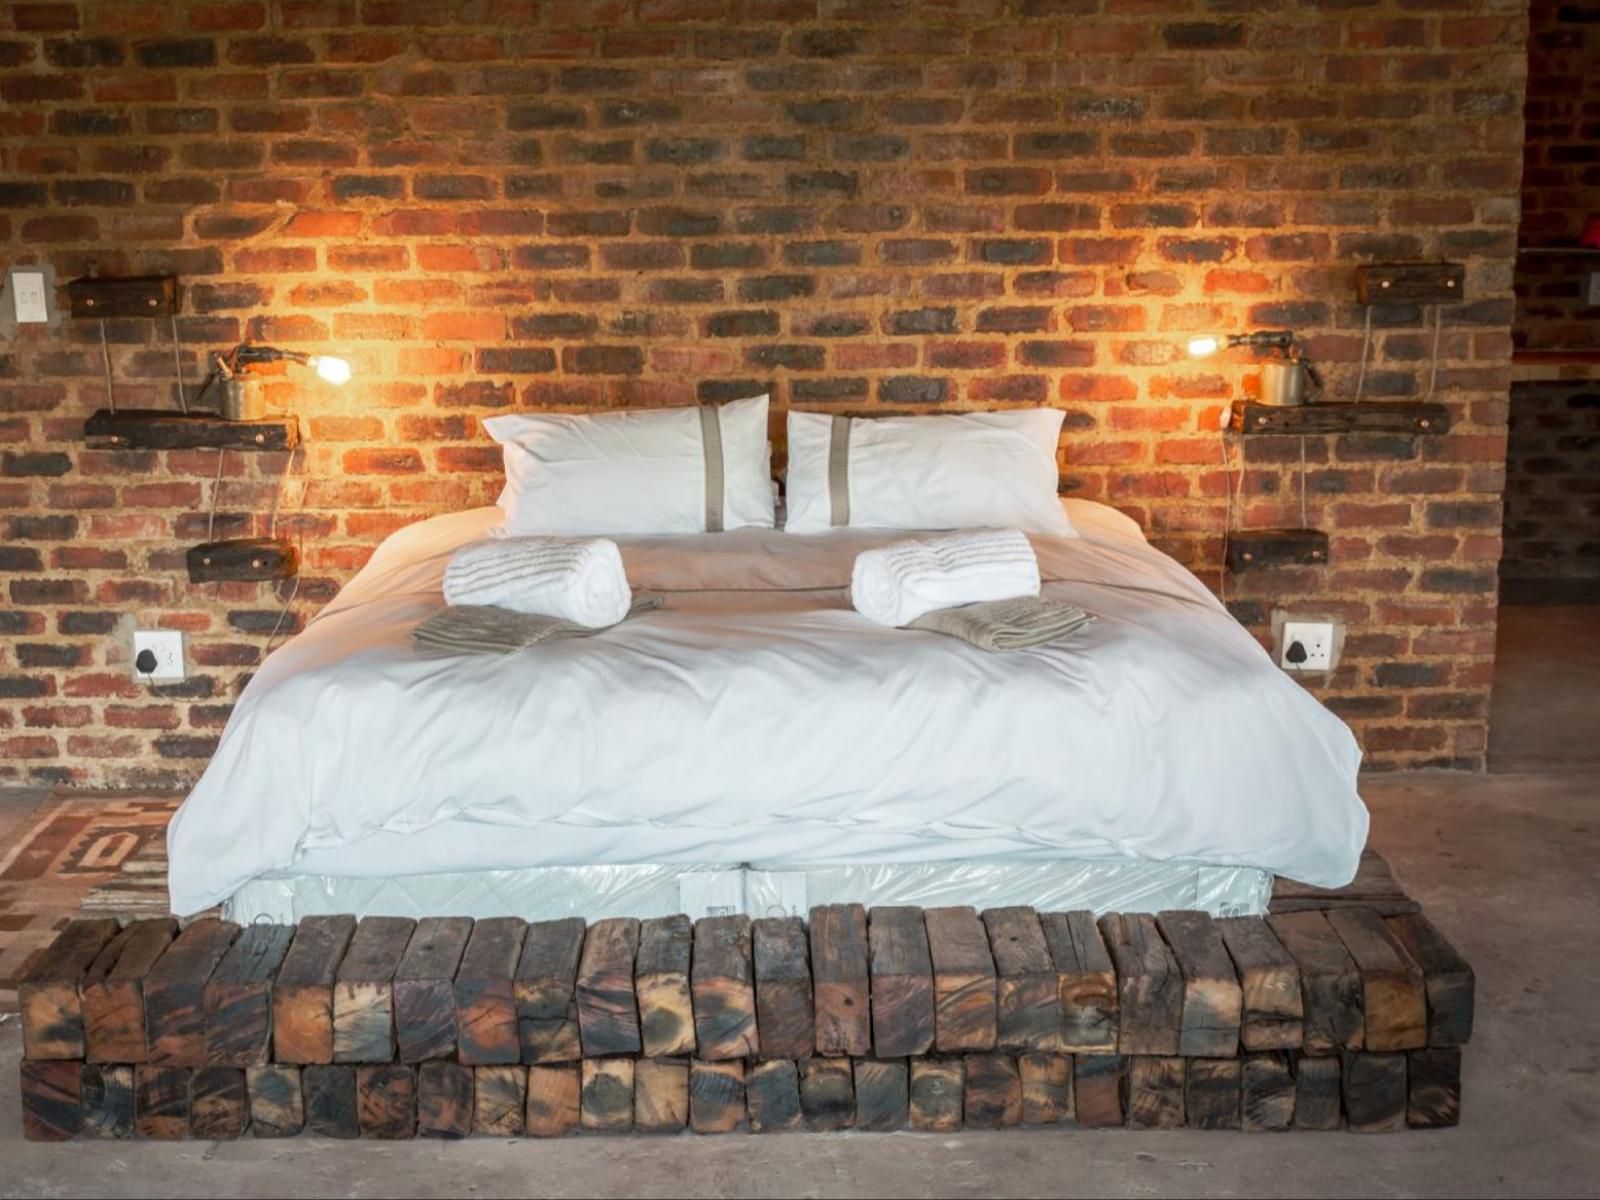 The Ancient Copper Shed Potchefstroom North West Province South Africa Bedroom, Brick Texture, Texture